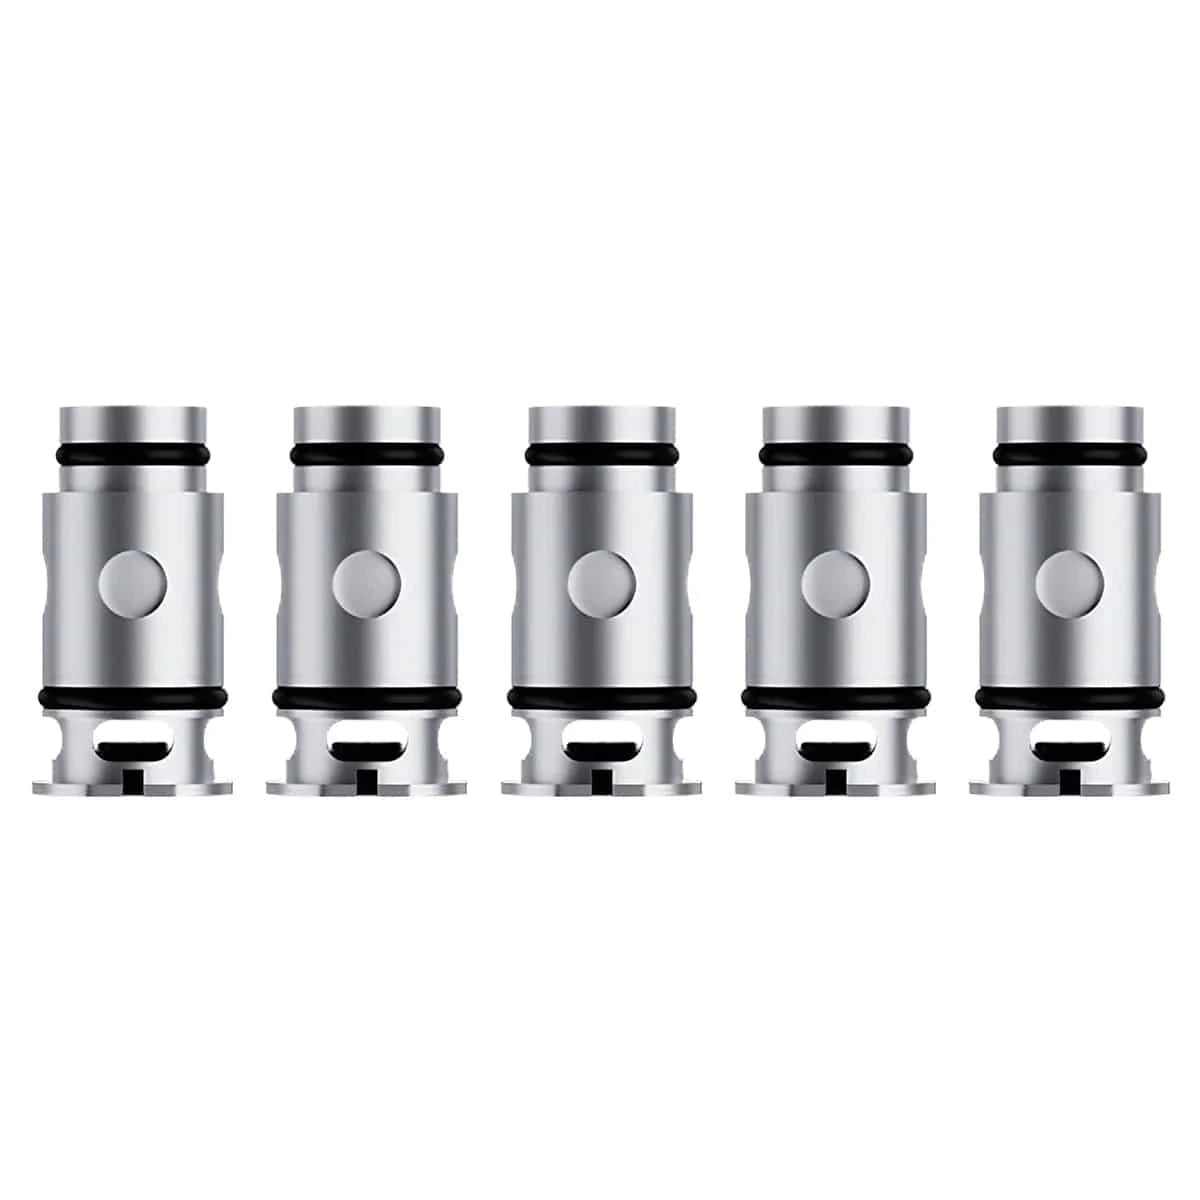 Vaporesso X35 Replacement Coils (Pack of 5) - achieversvapes.co.uk